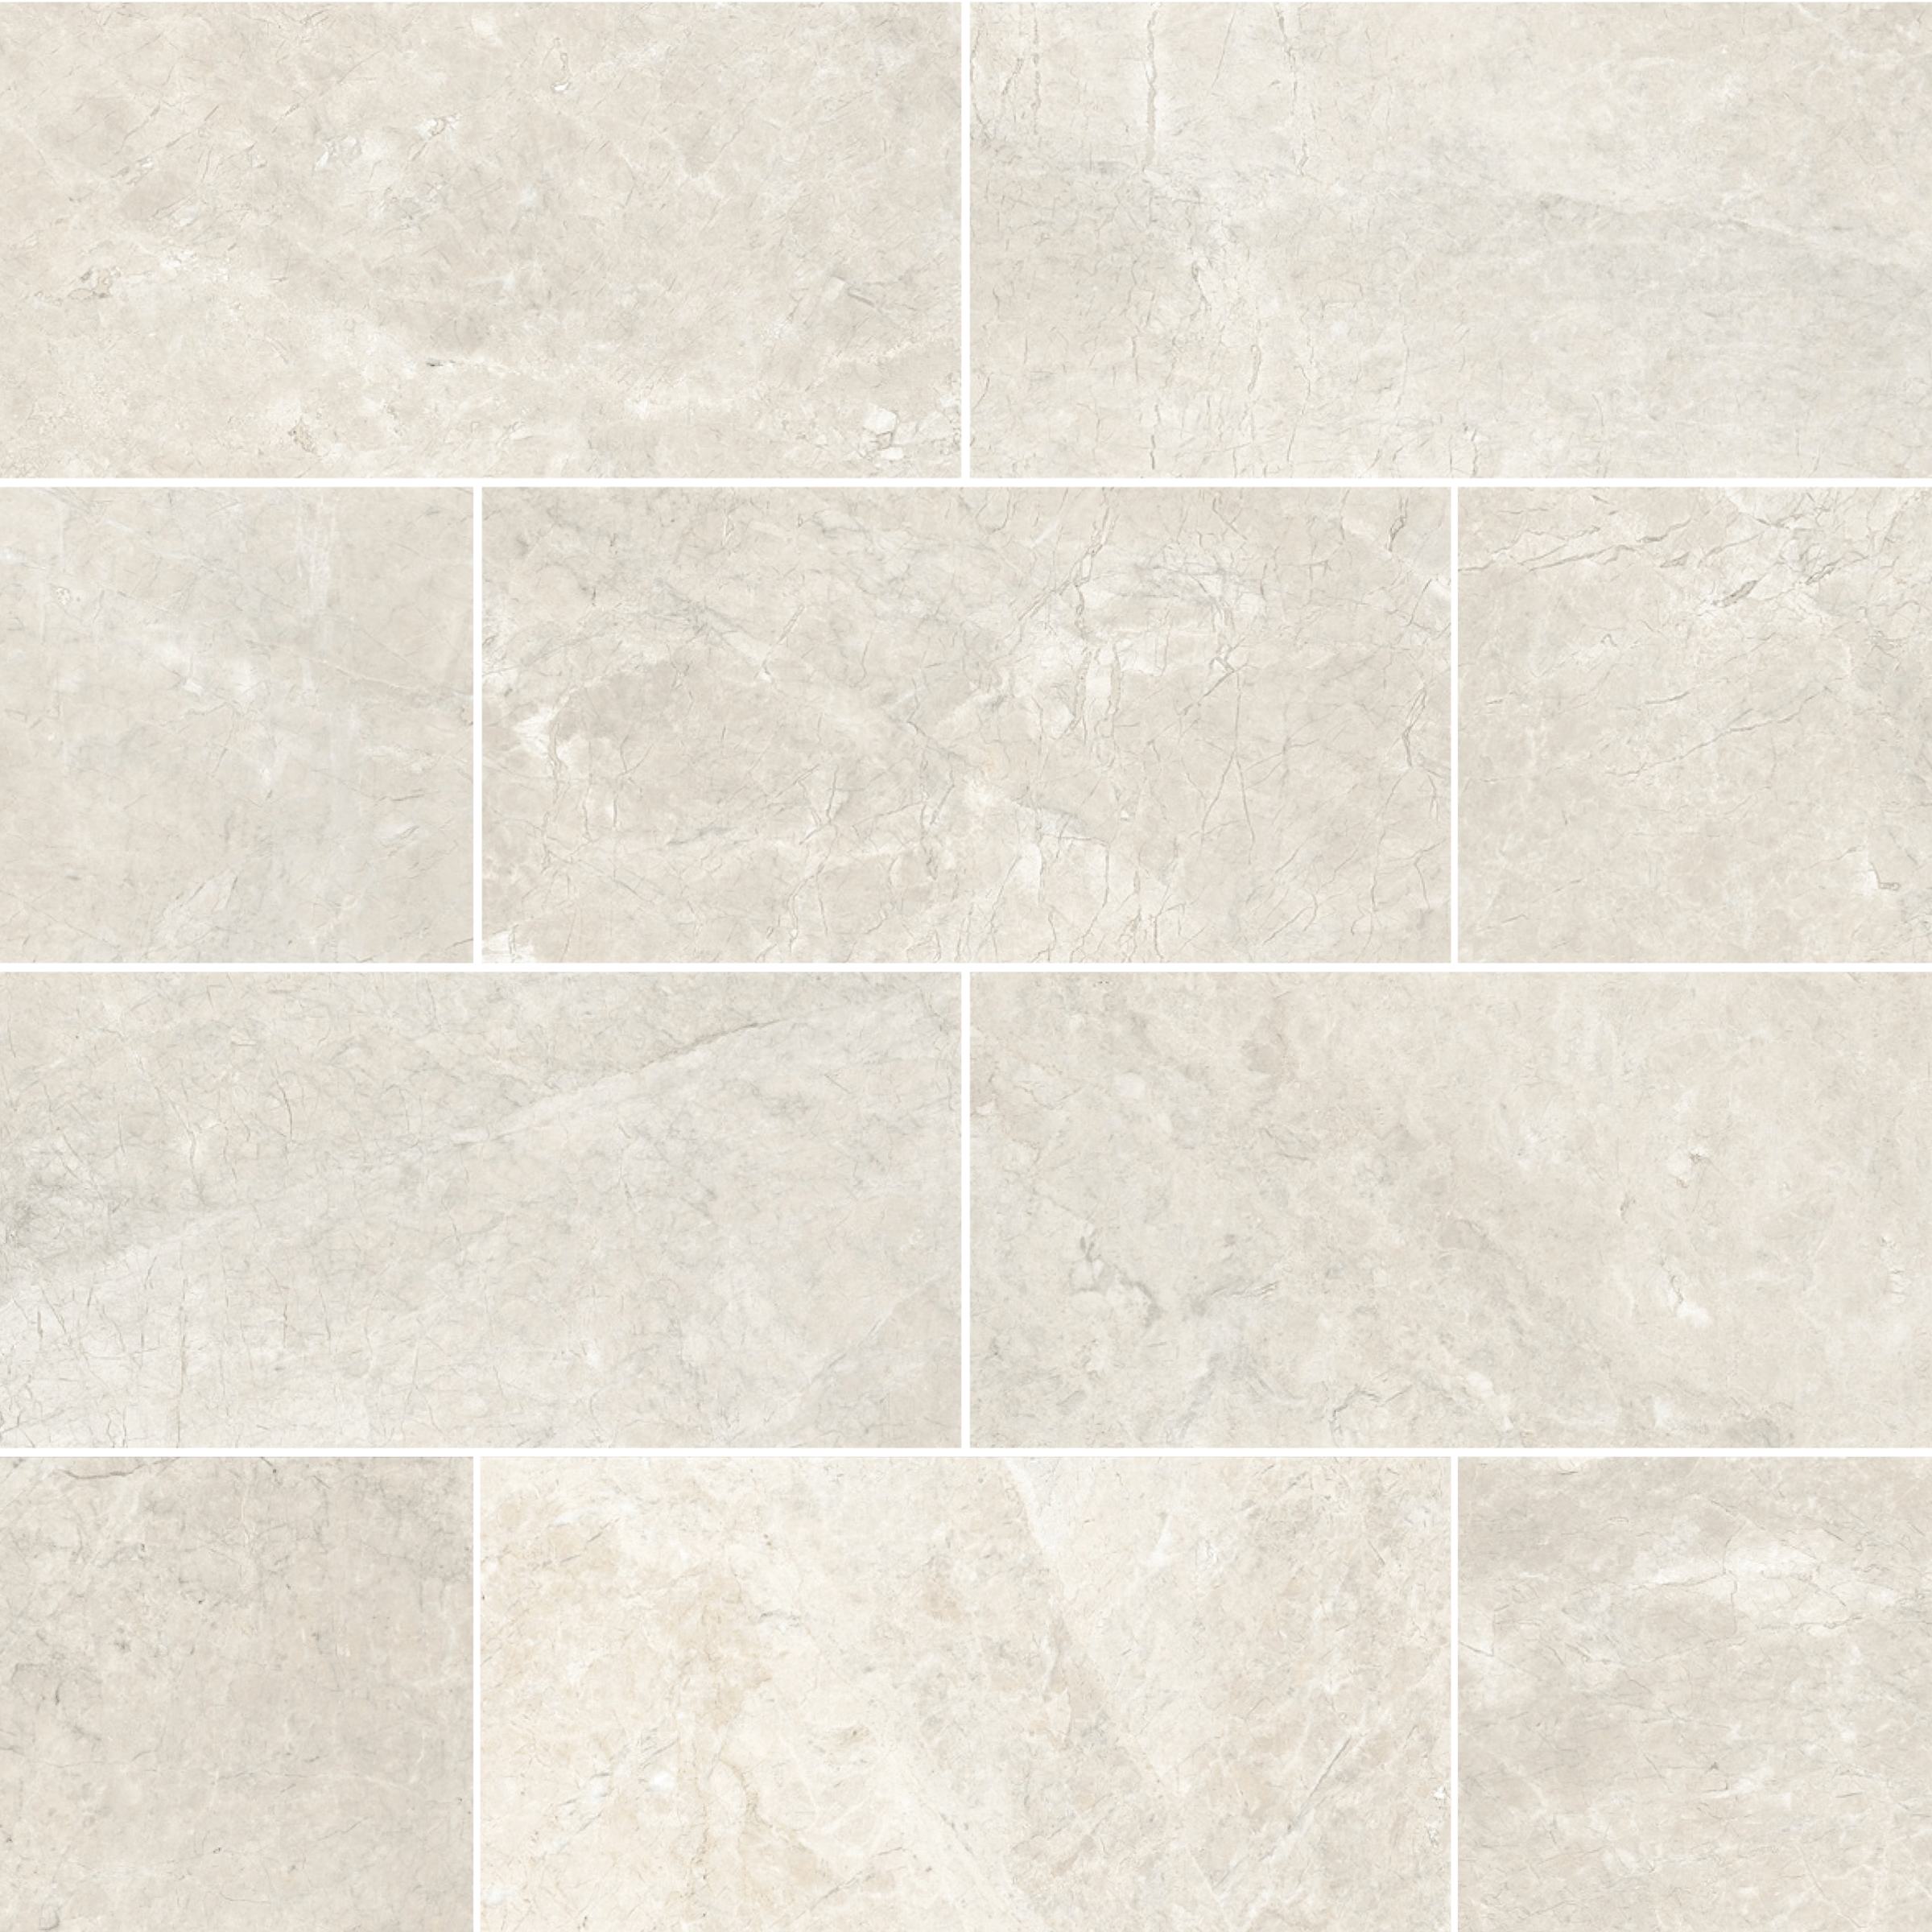 Assos Platinum Marble Floor and Wall Tile Polished / 12" x 24" - DW TILE & STONE - Atlanta Marble Natural Stone Wholesale Stone Supplier